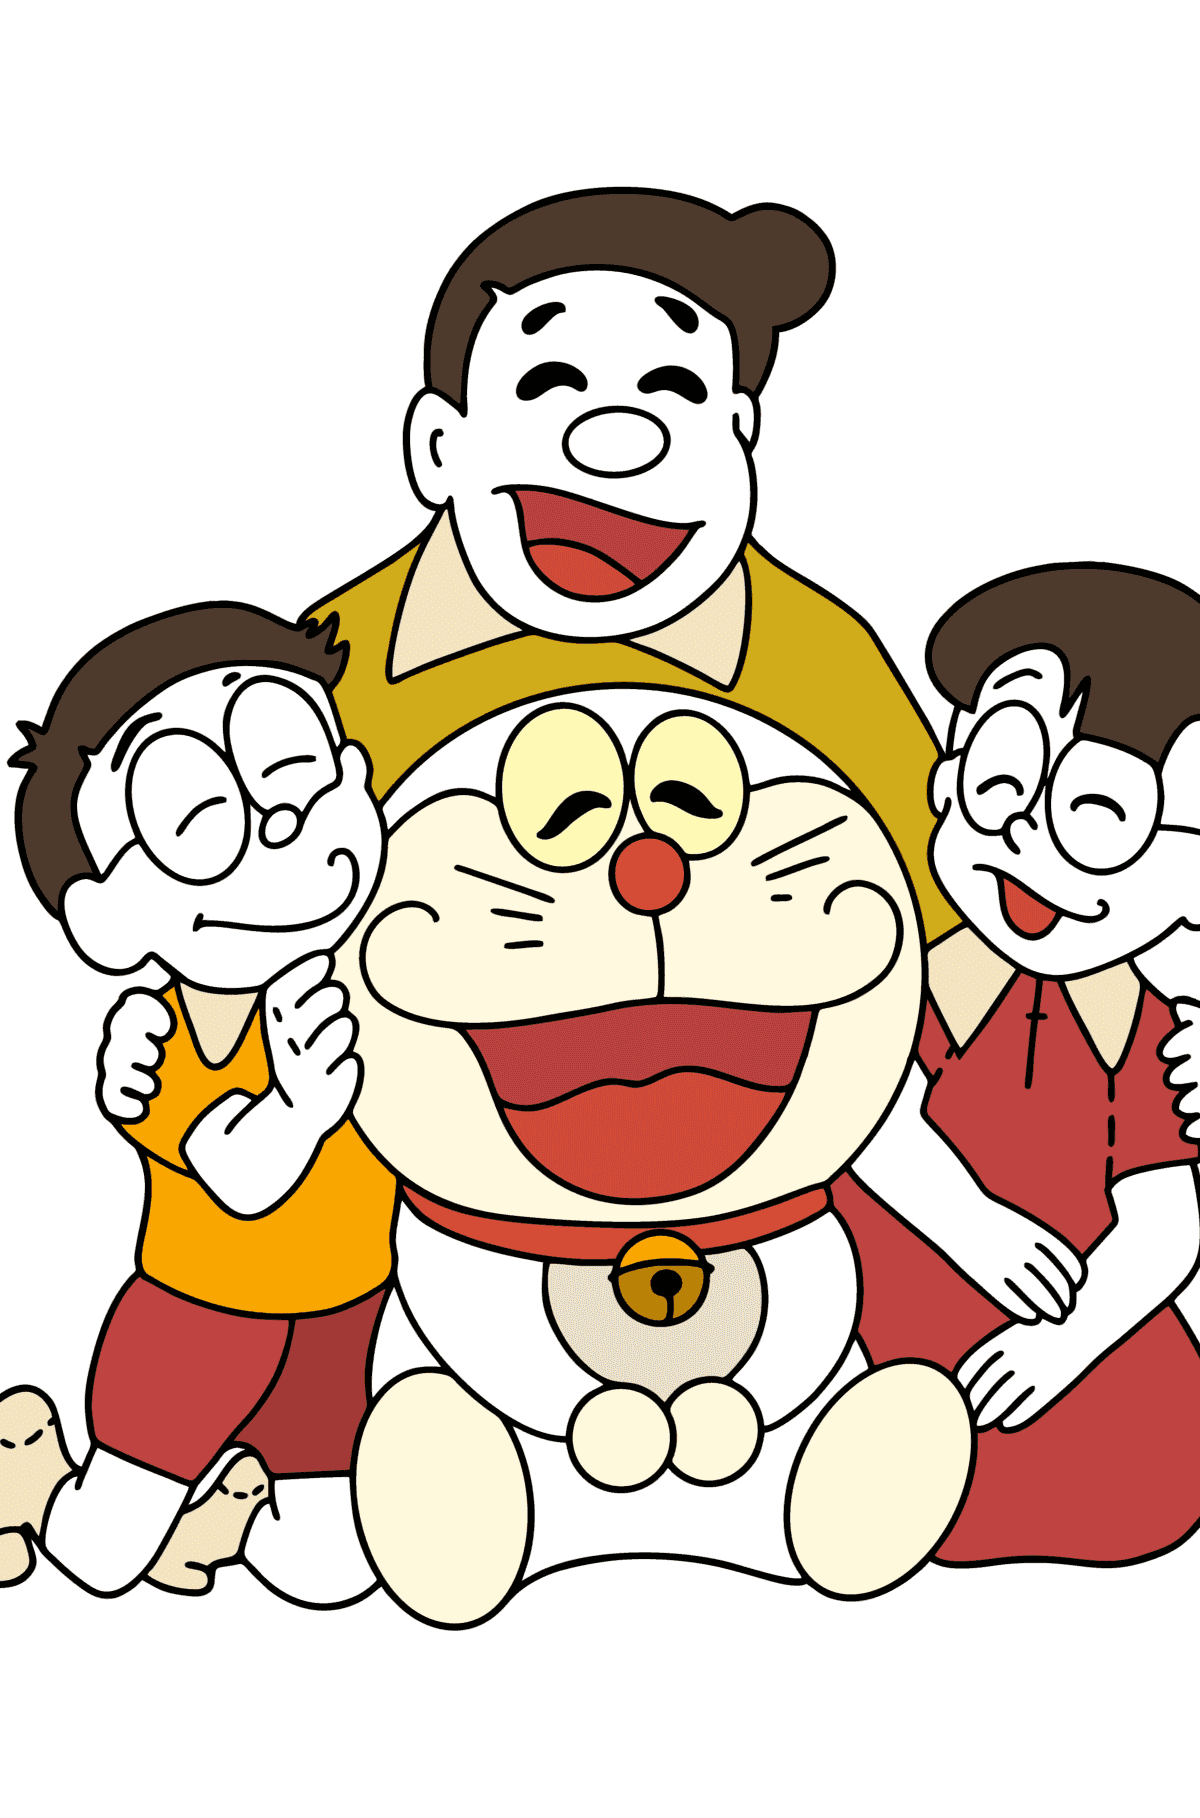 Doraemon family сoloring page - Coloring Pages for Kids